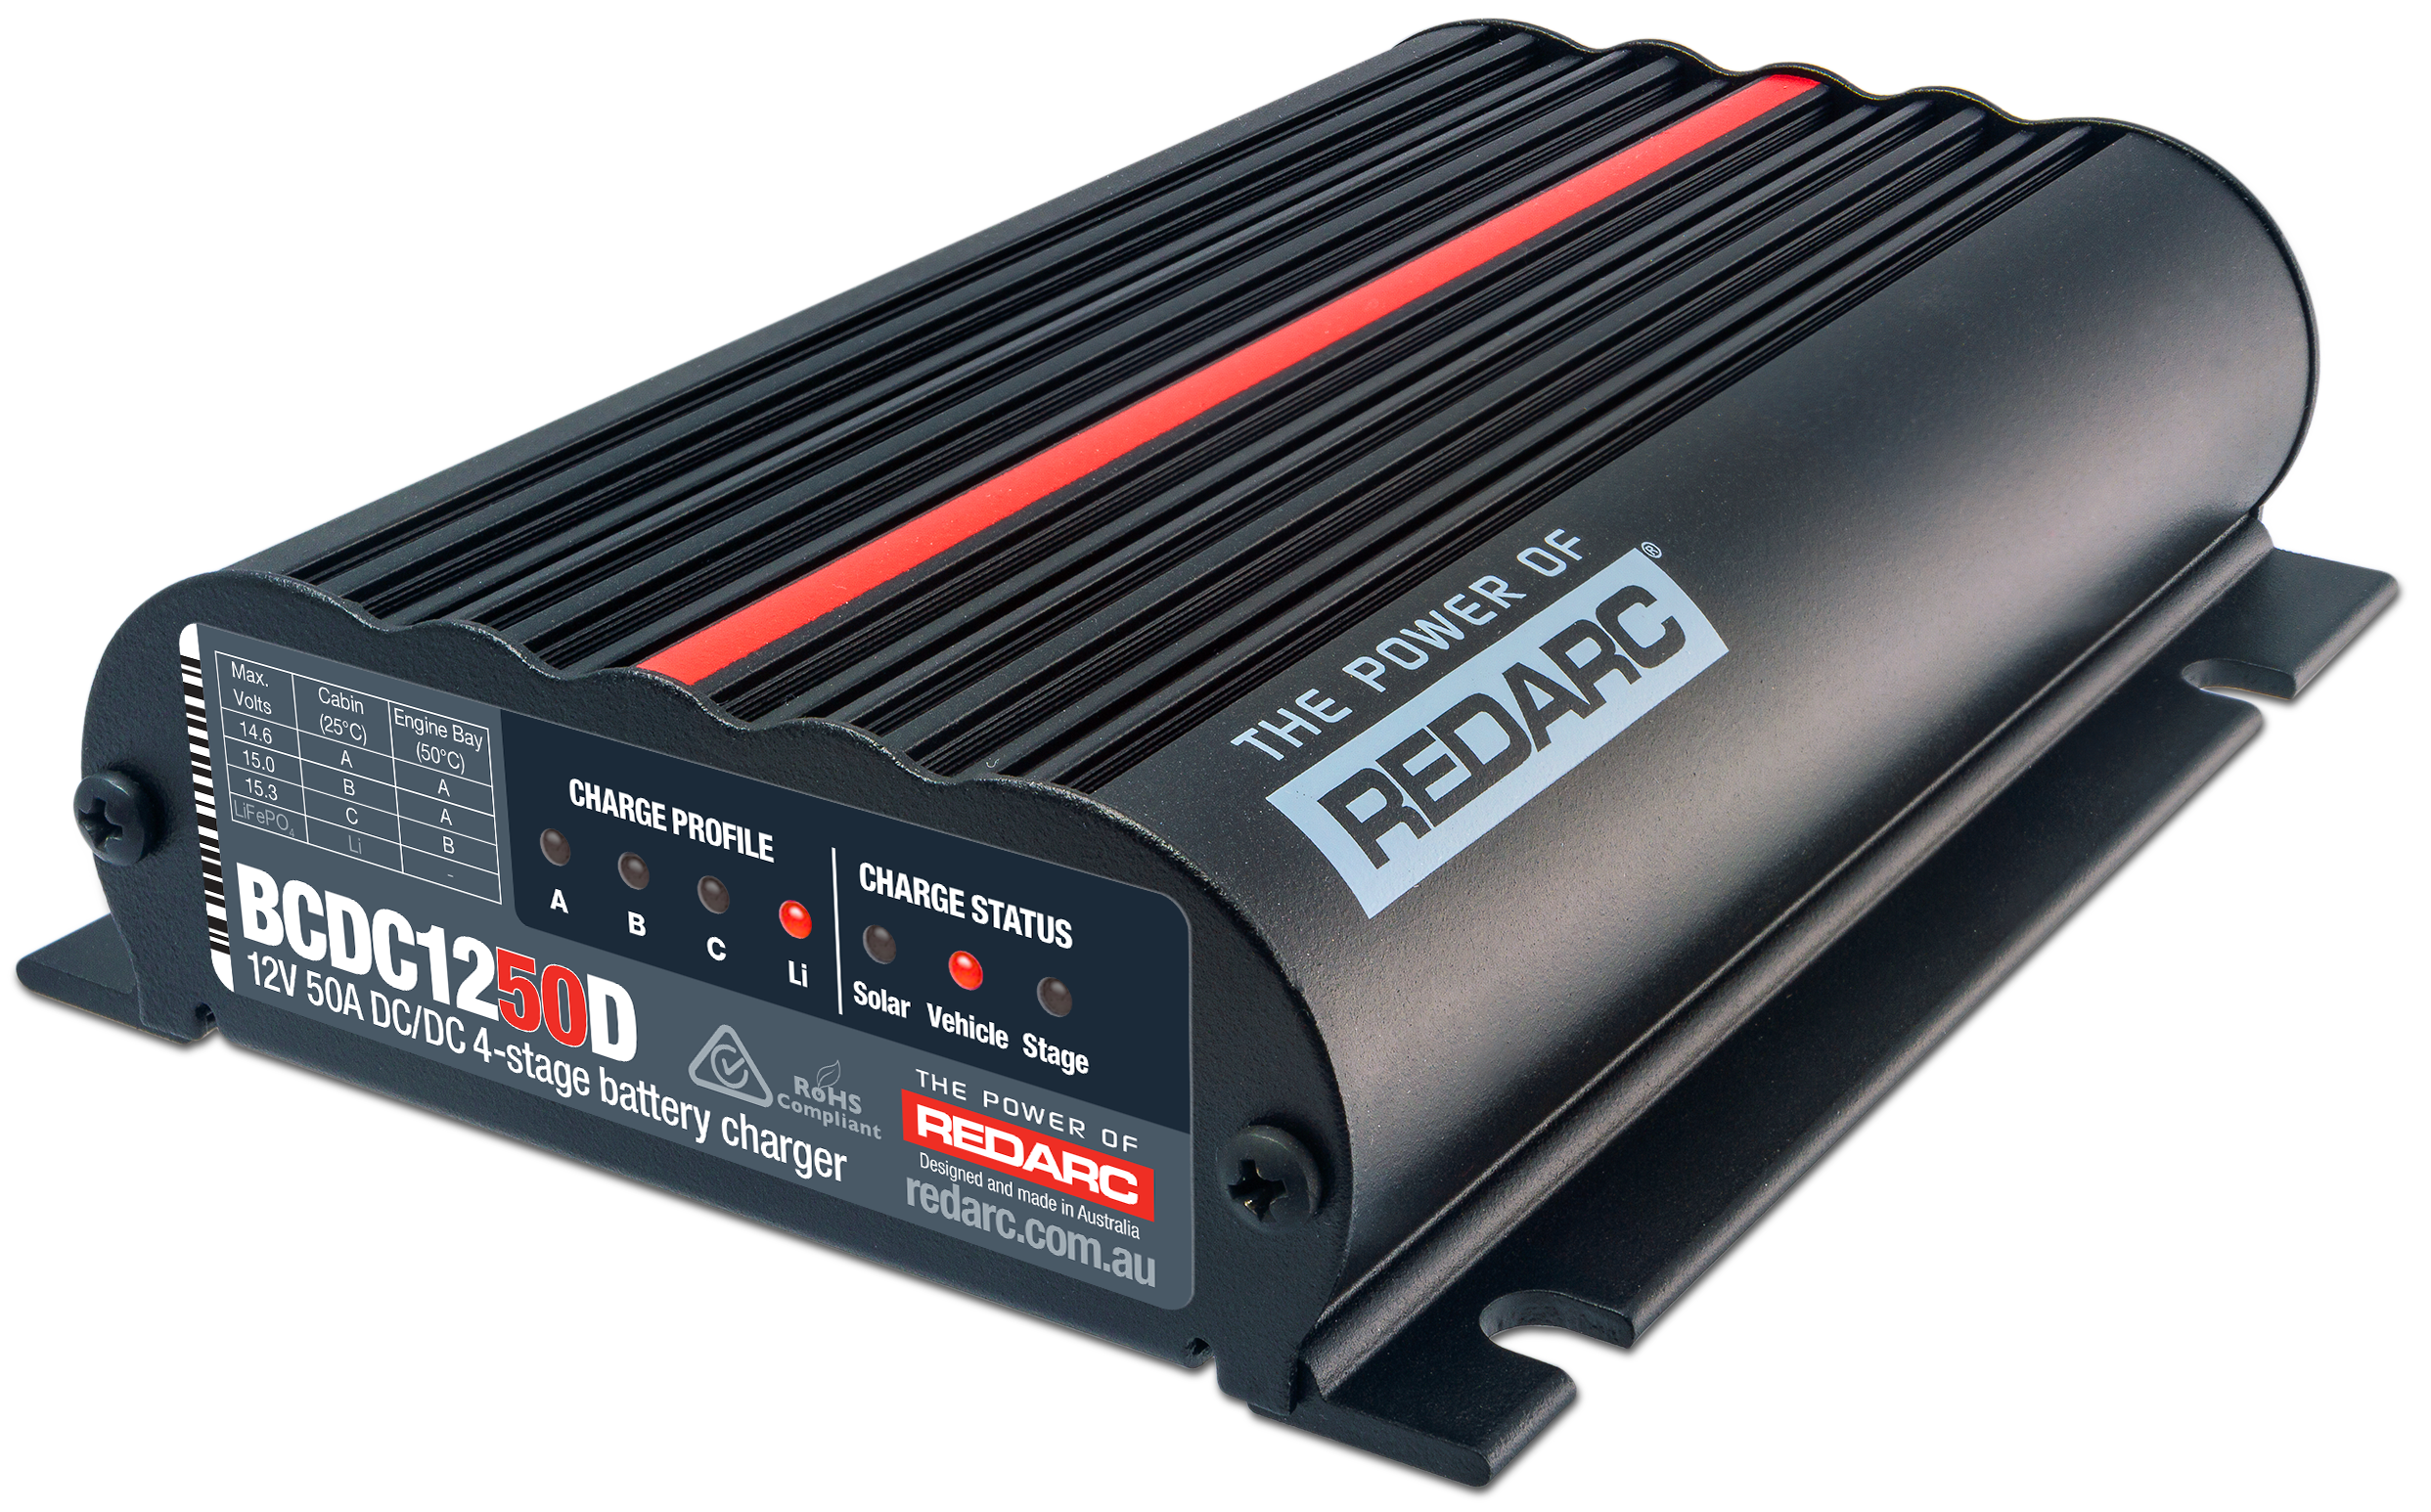 REDARC Dual Input 50A In-Vehicle DC Battery Charger BCDC1250D